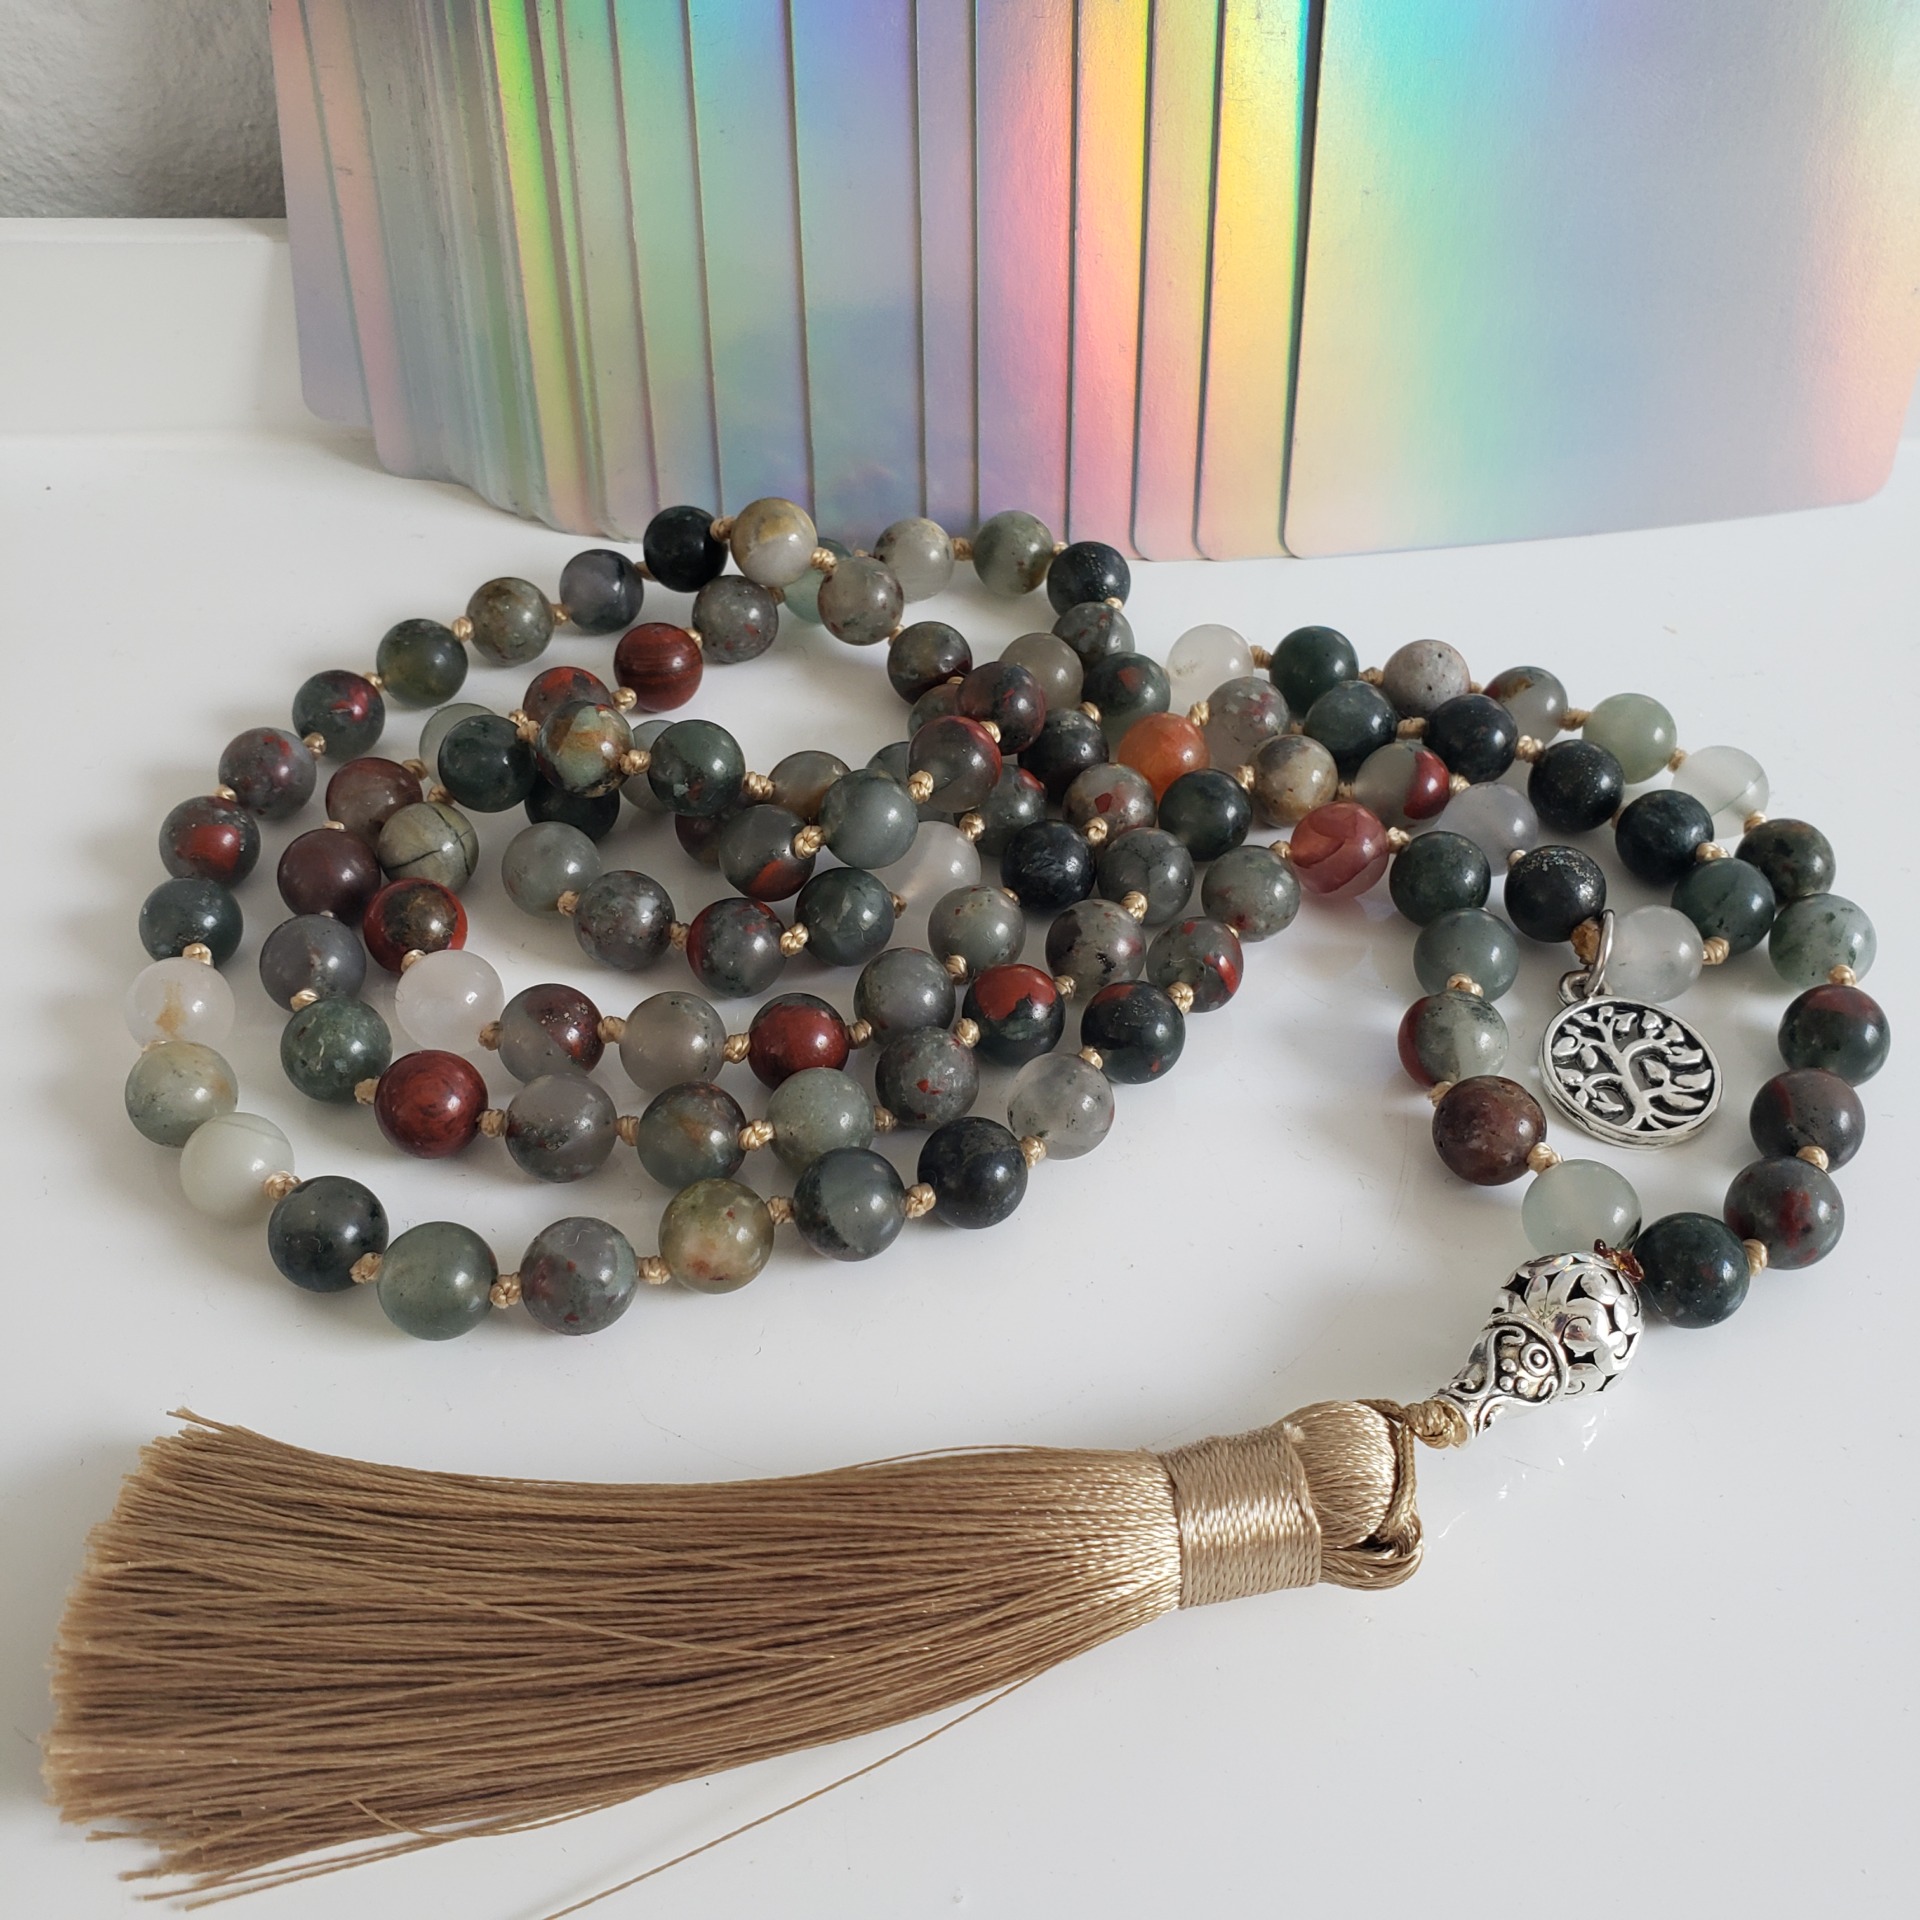 Accessories – energy crystals